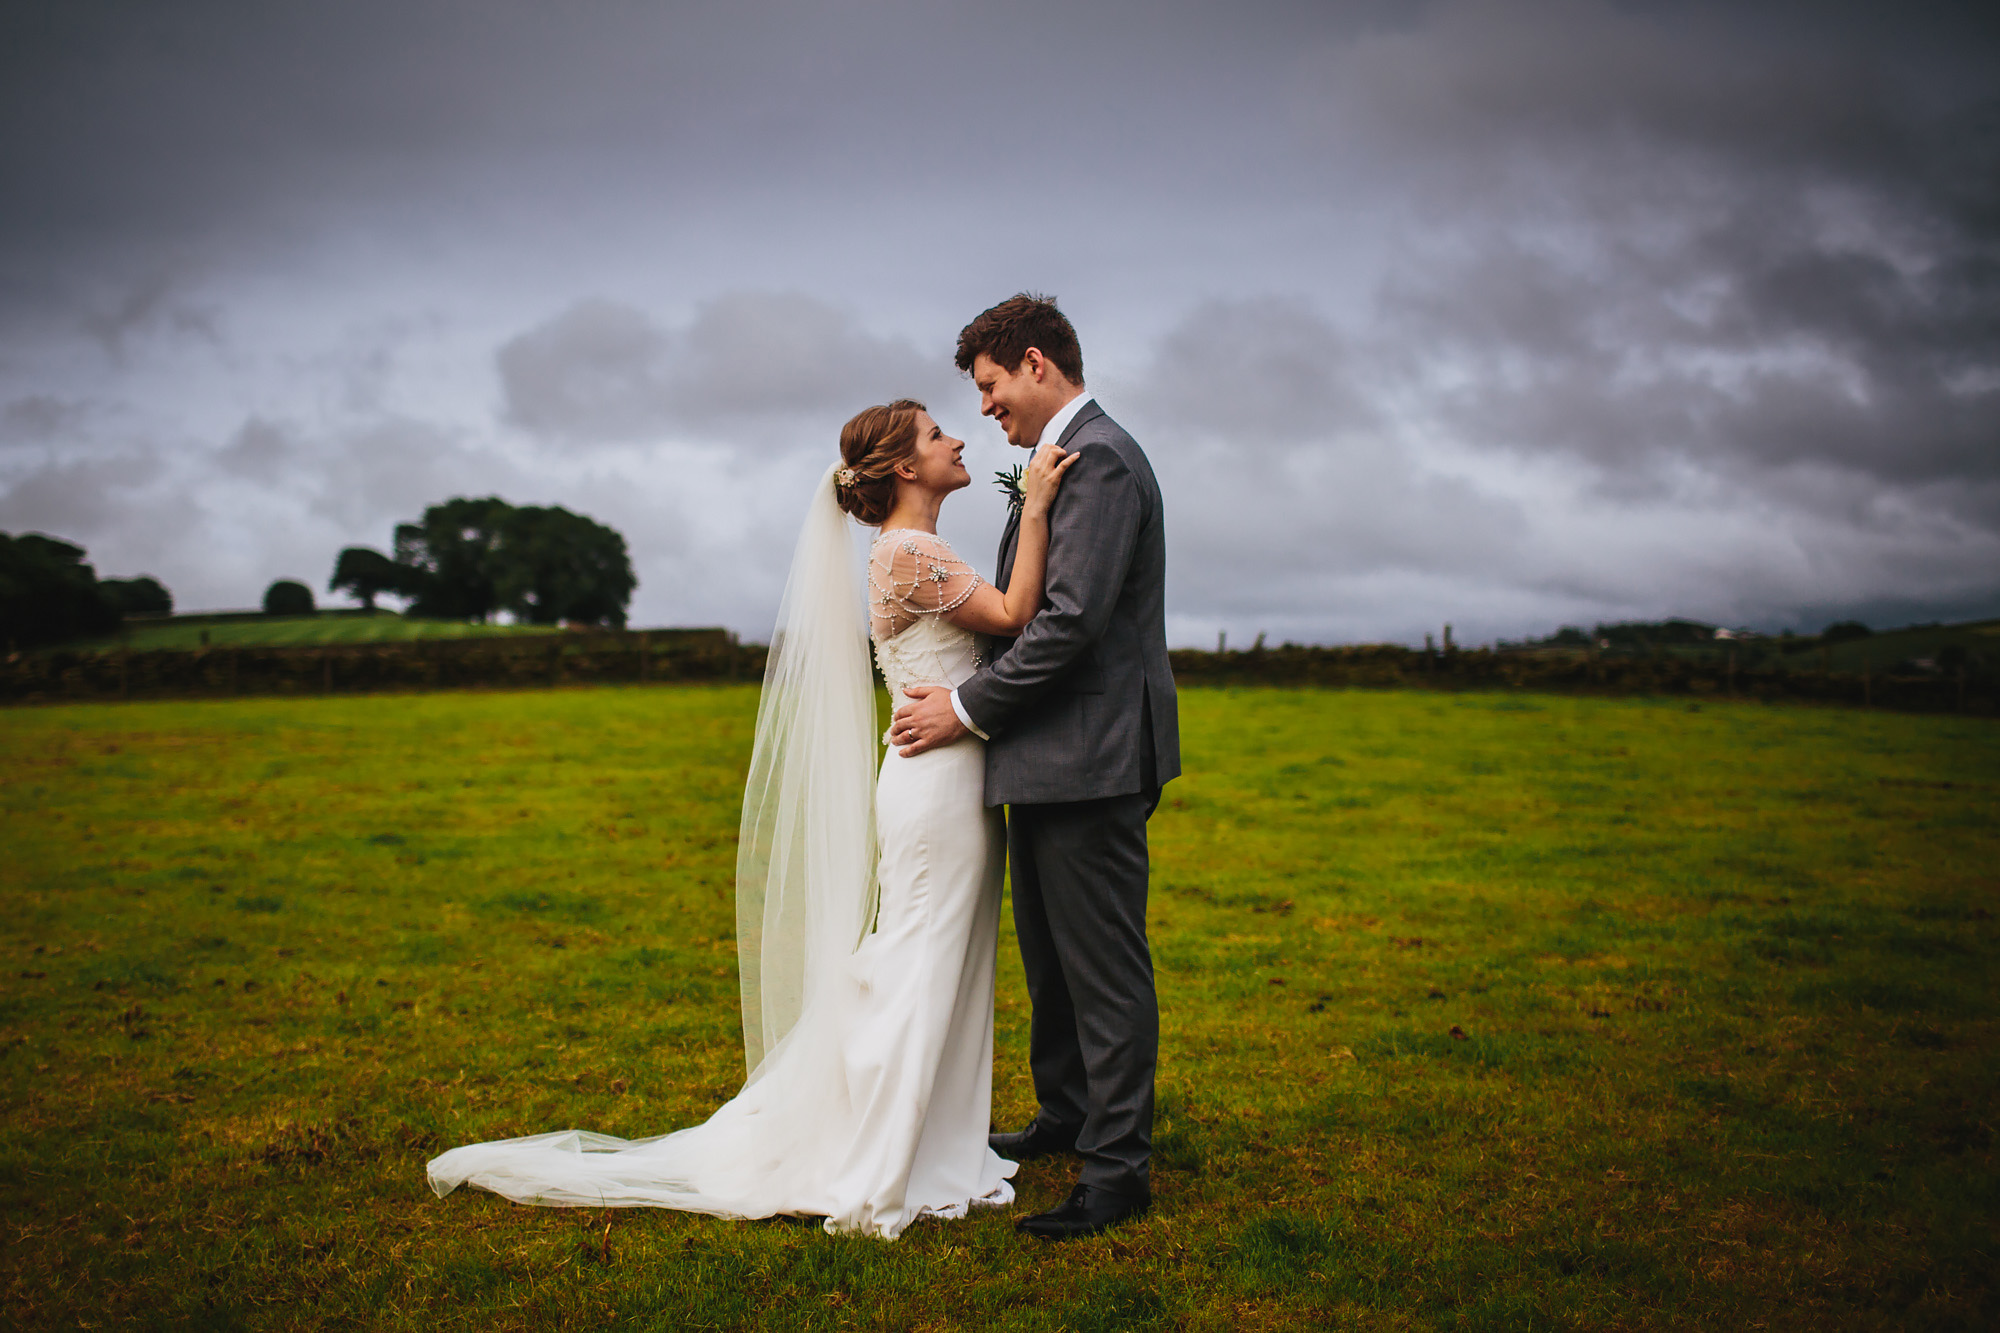 Bride and groom smiling at each other in a field